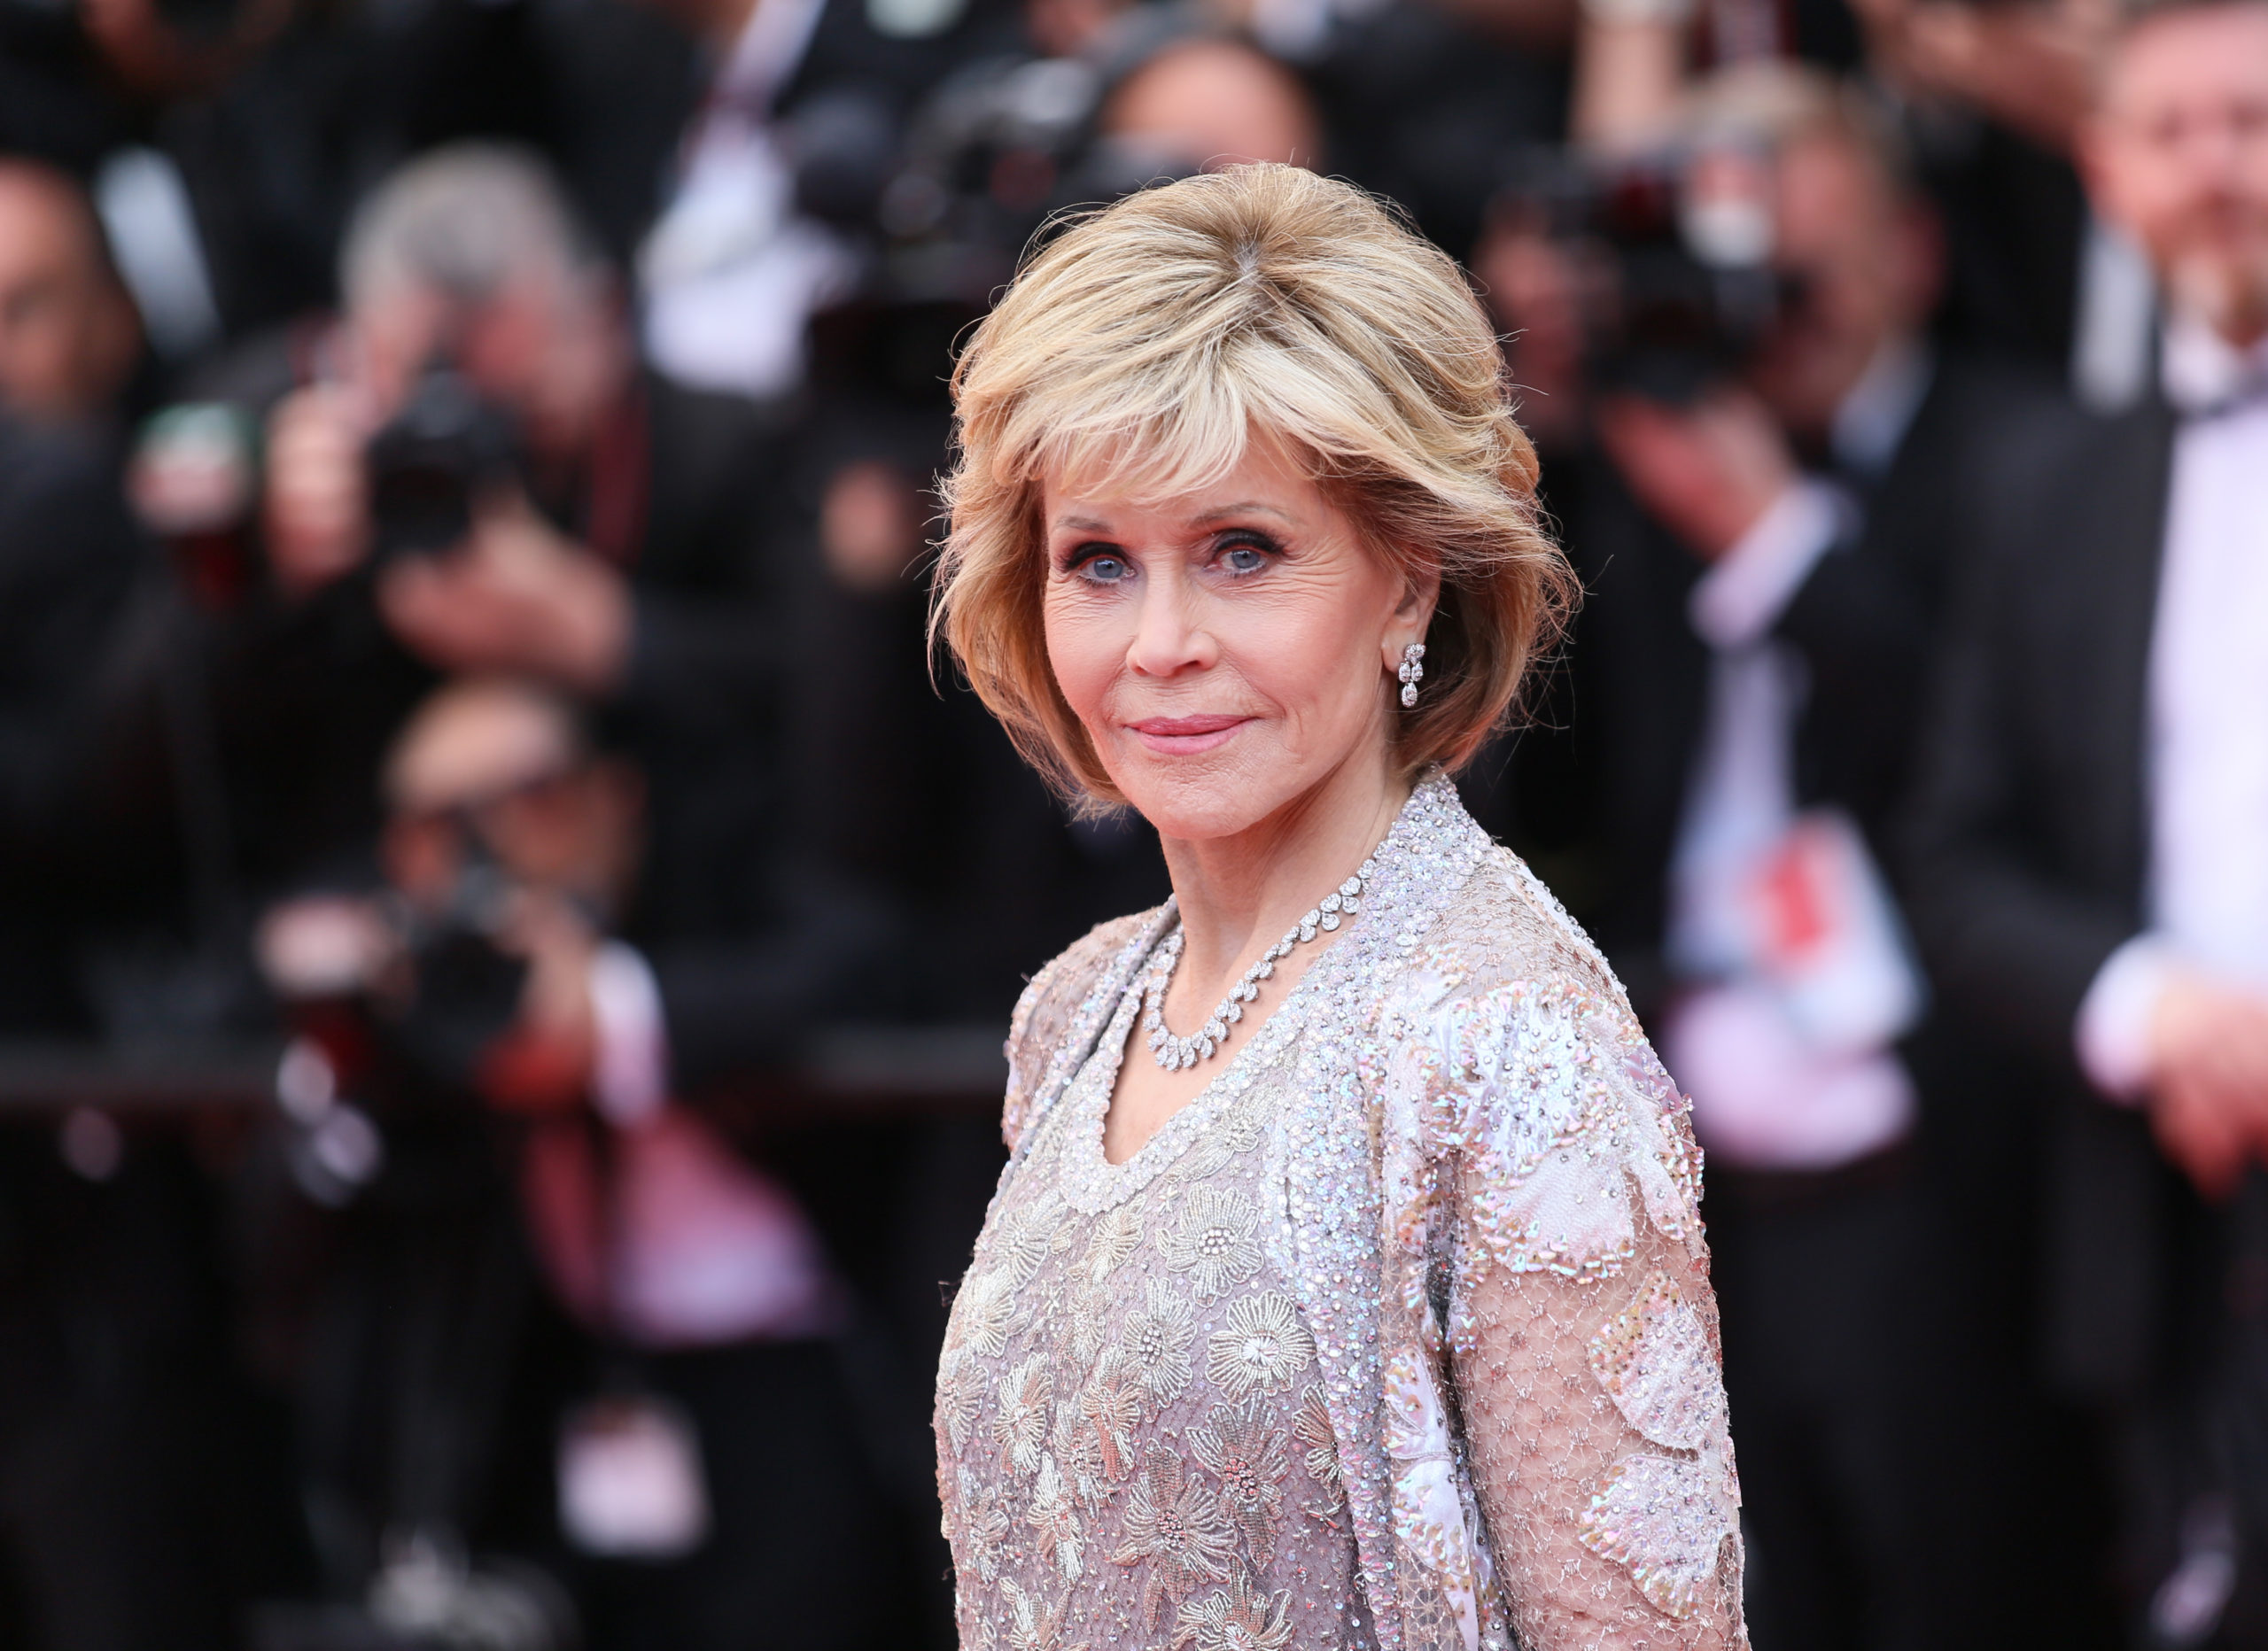 Jane Fonda Opens Up About Motherhood; Admits She Could’ve Been a Better Mother to Her 3 Children | Jane Fonda is finding a new sense of purpose and meaning in being a mother in her later years -- adding she wishes she had been a better mother to her 3 kids.